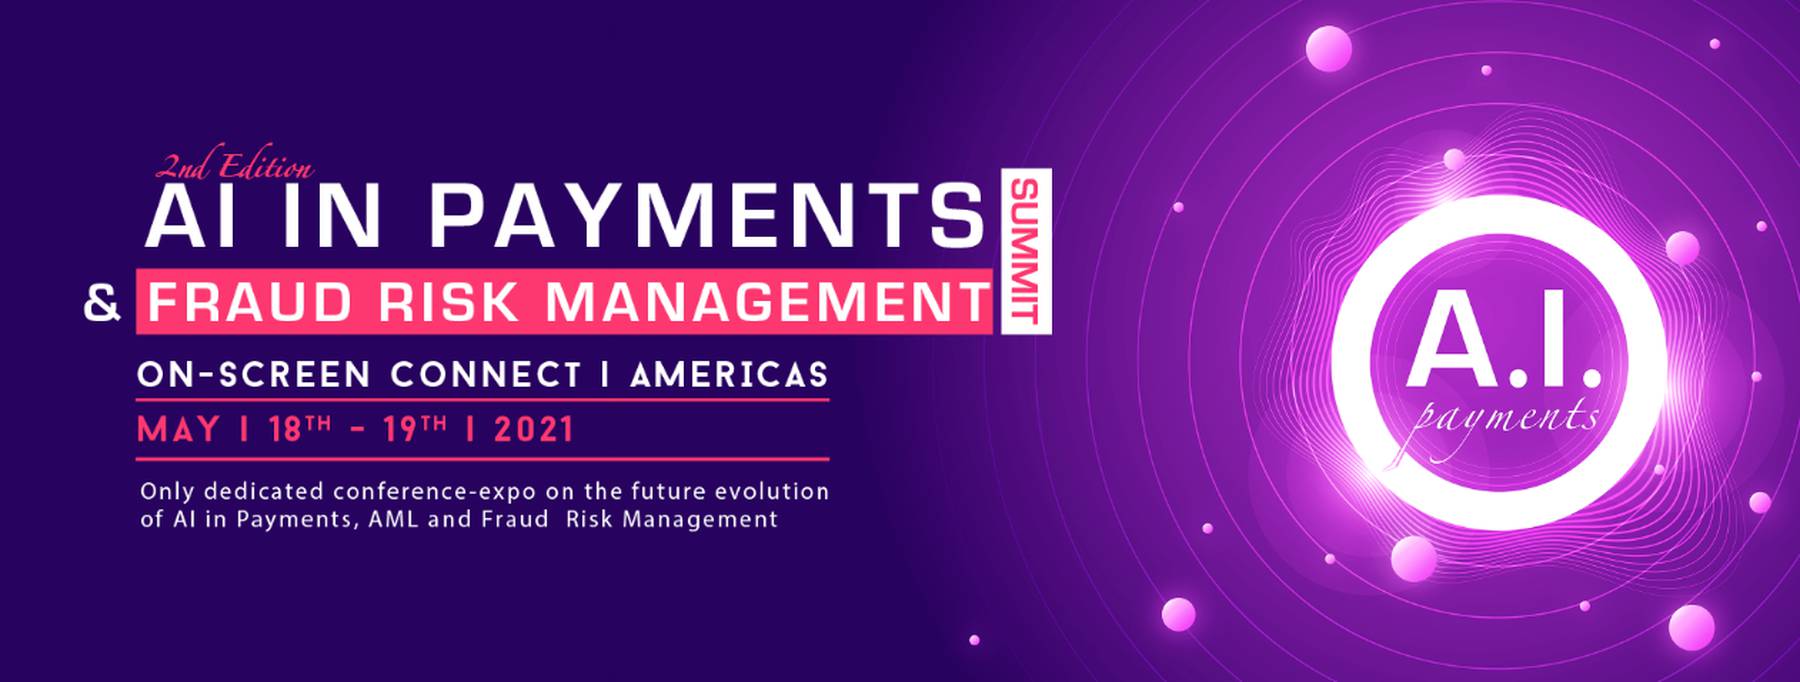 AI in Payments & Fraud Risk Management Summit Americas 2021